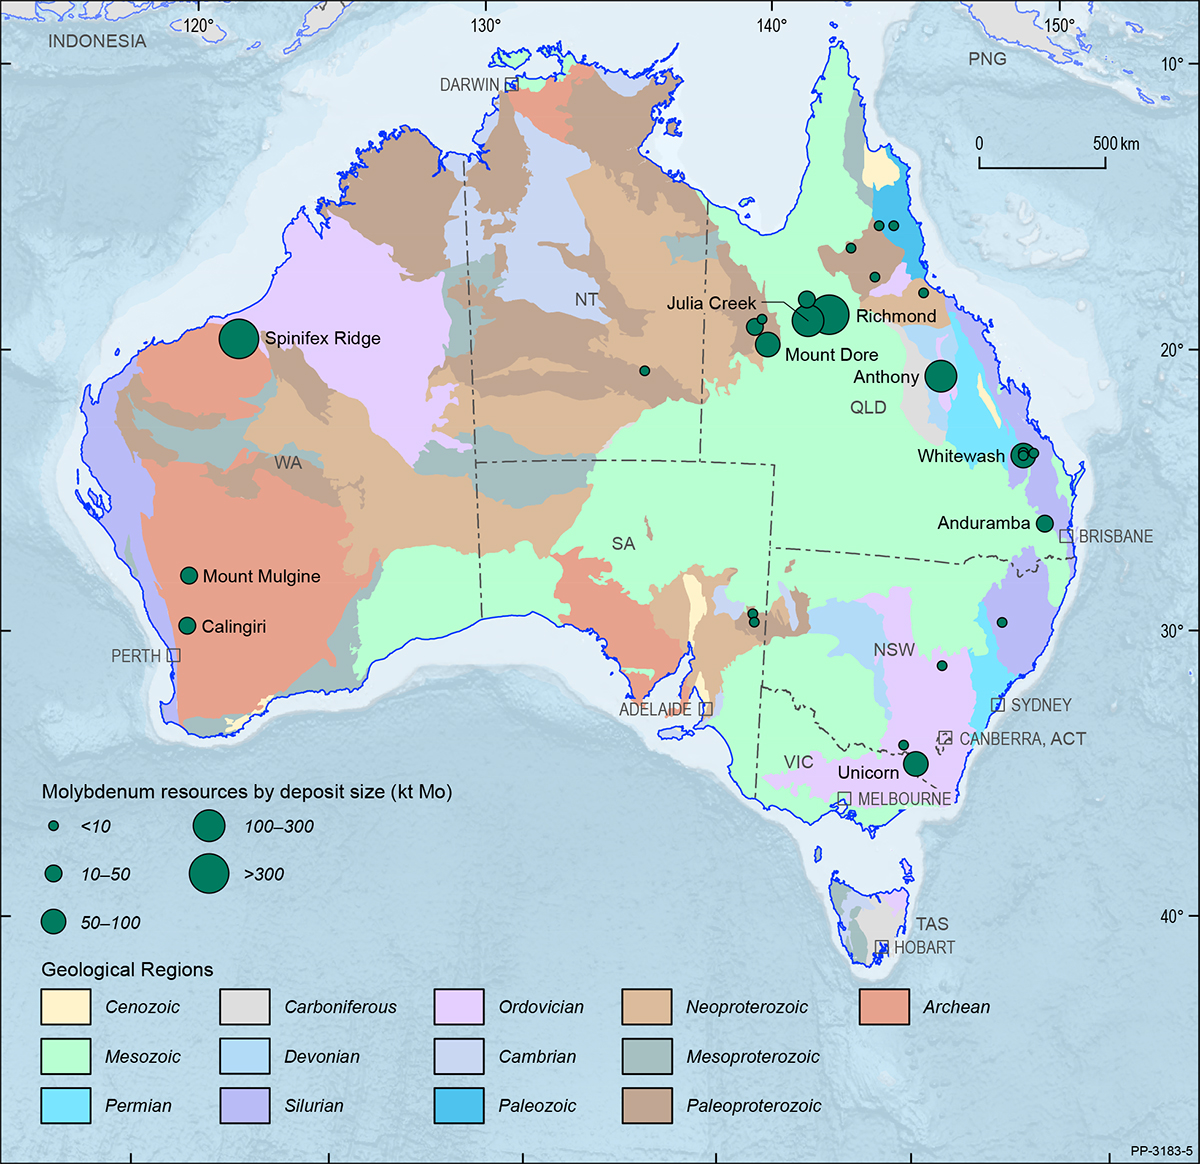 A map showing the Australian continent shaded by the ages of the main geological provinces highlighting the geographical distribution of Australian molybdenum deposits in 2019.